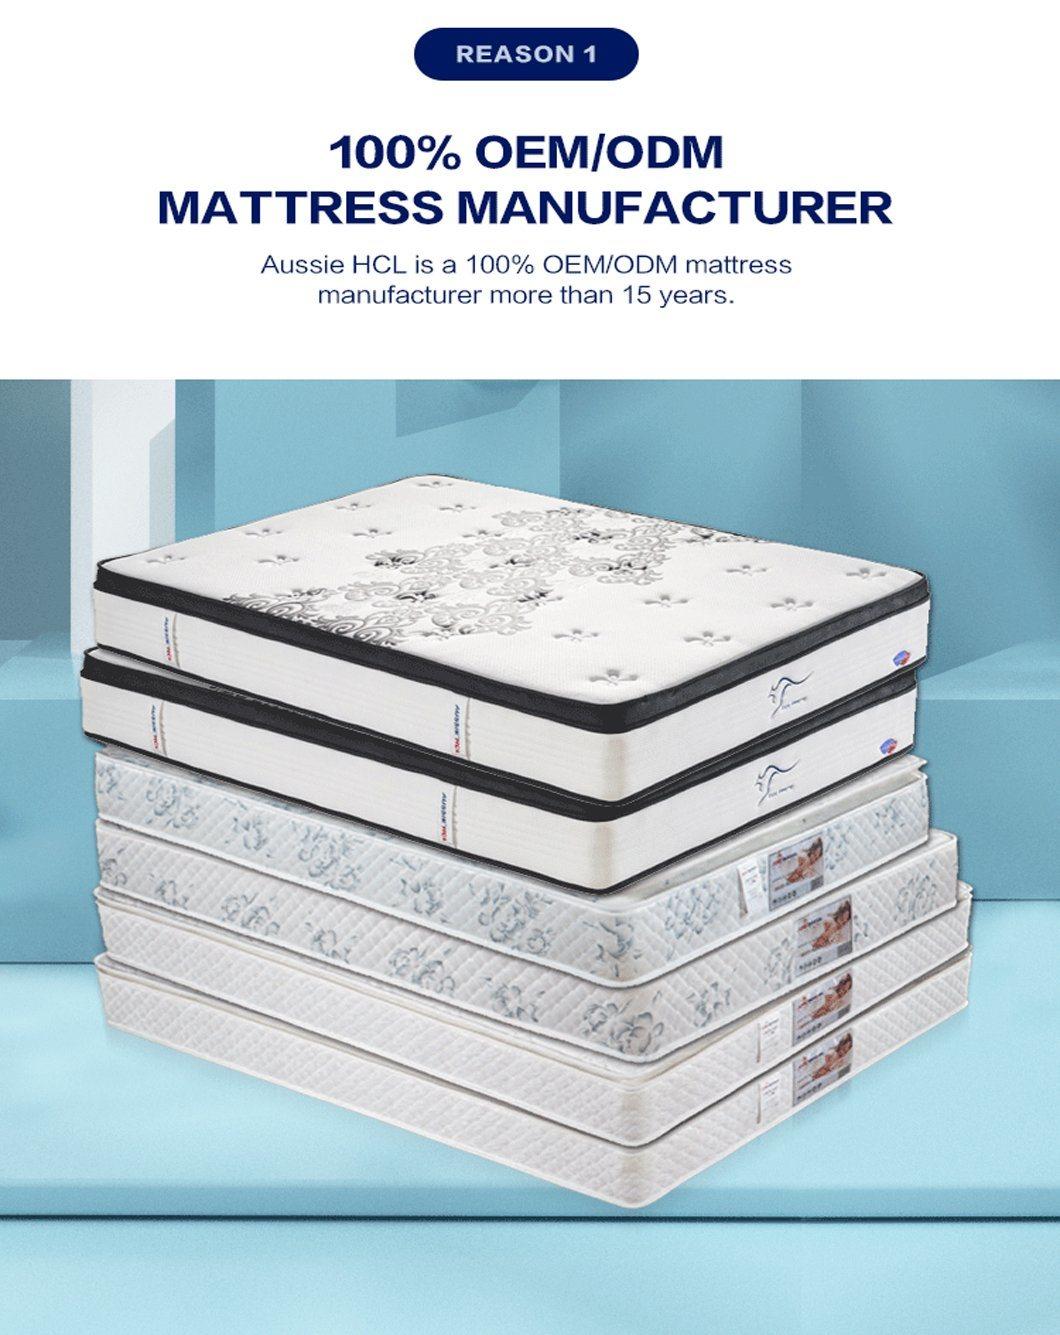 Quality Double Bed Mattress Roll Pressure Relief Memory Foam Mattress Colchon Compressed in a Box